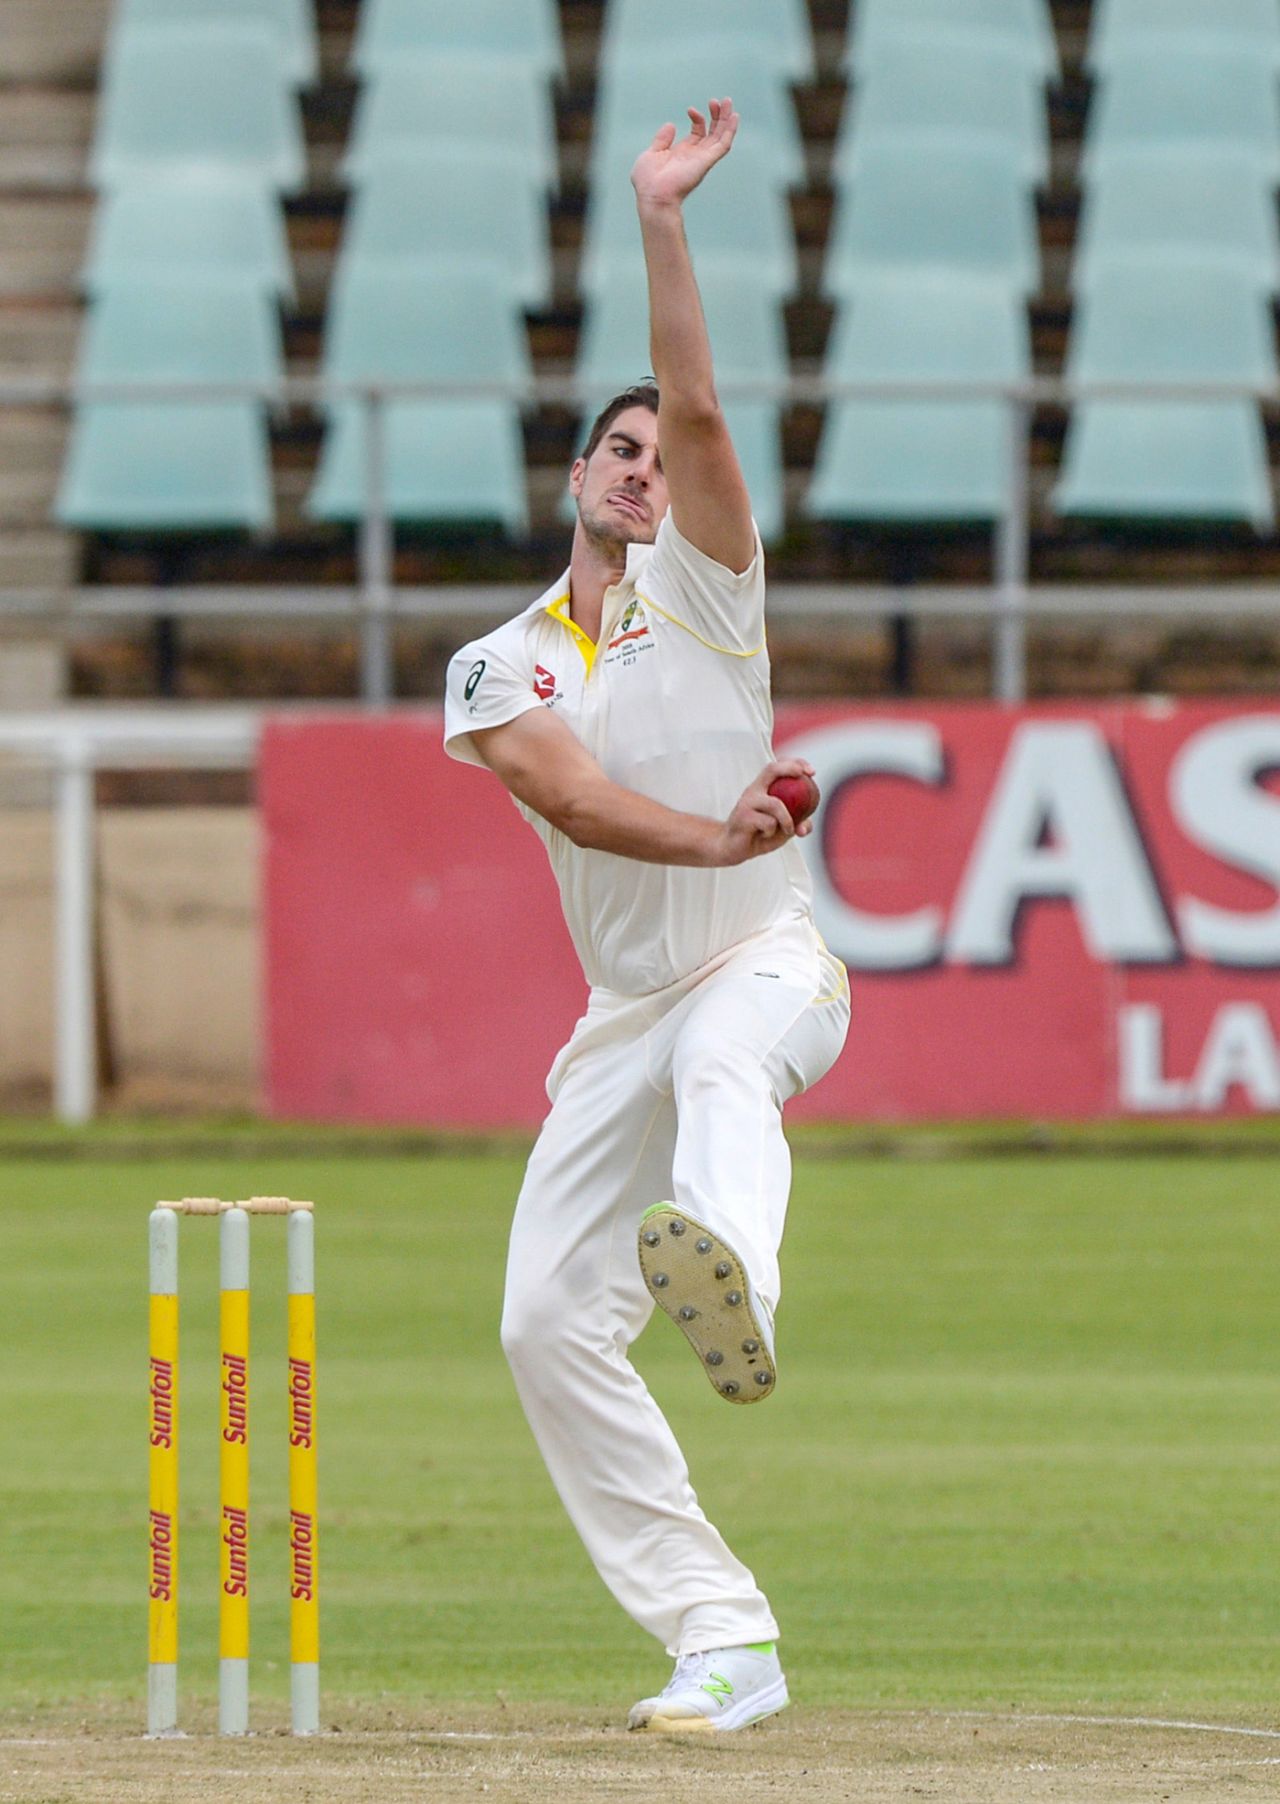 Pat Cummins hits his delivery stride, South Africa A v Australia, Benoni, February 22, 2018